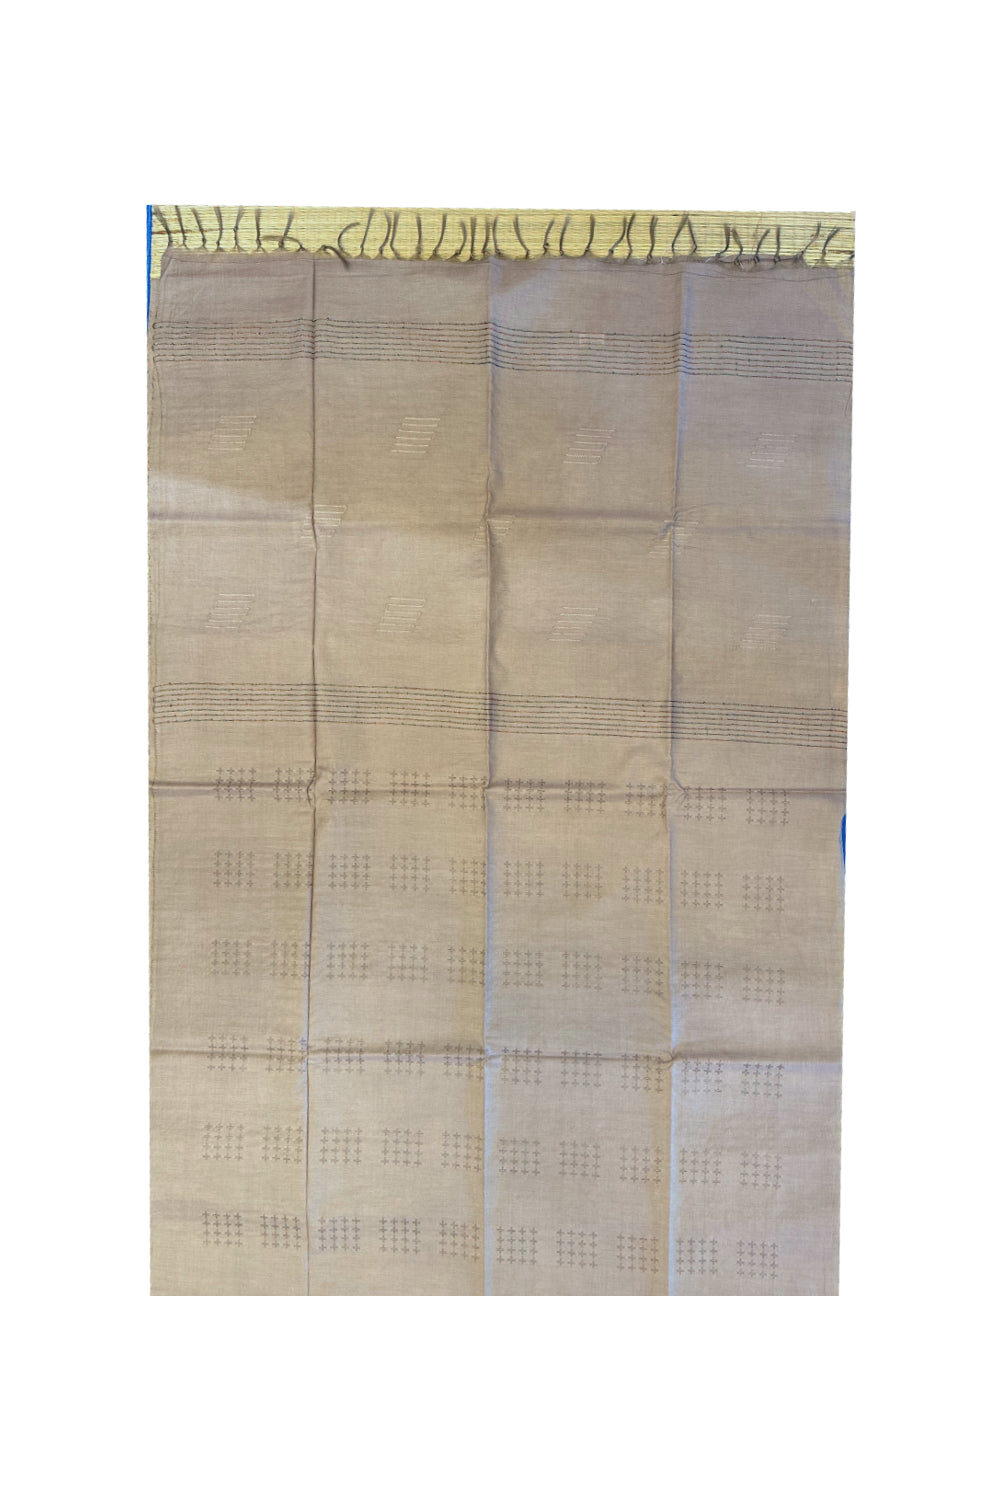 Southloom Pure Tussar Saree with Plain Body and Blouse Piece in Beige Brown